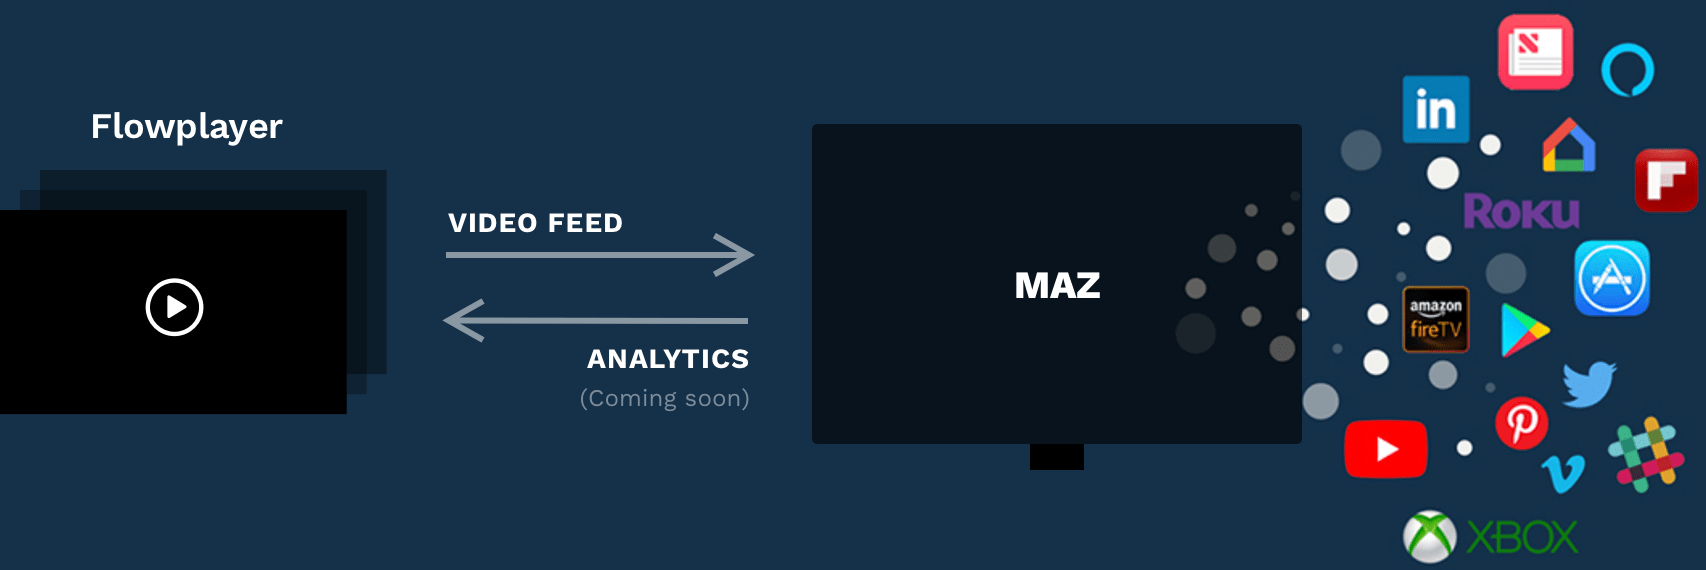 Flowplayer partners with Maz